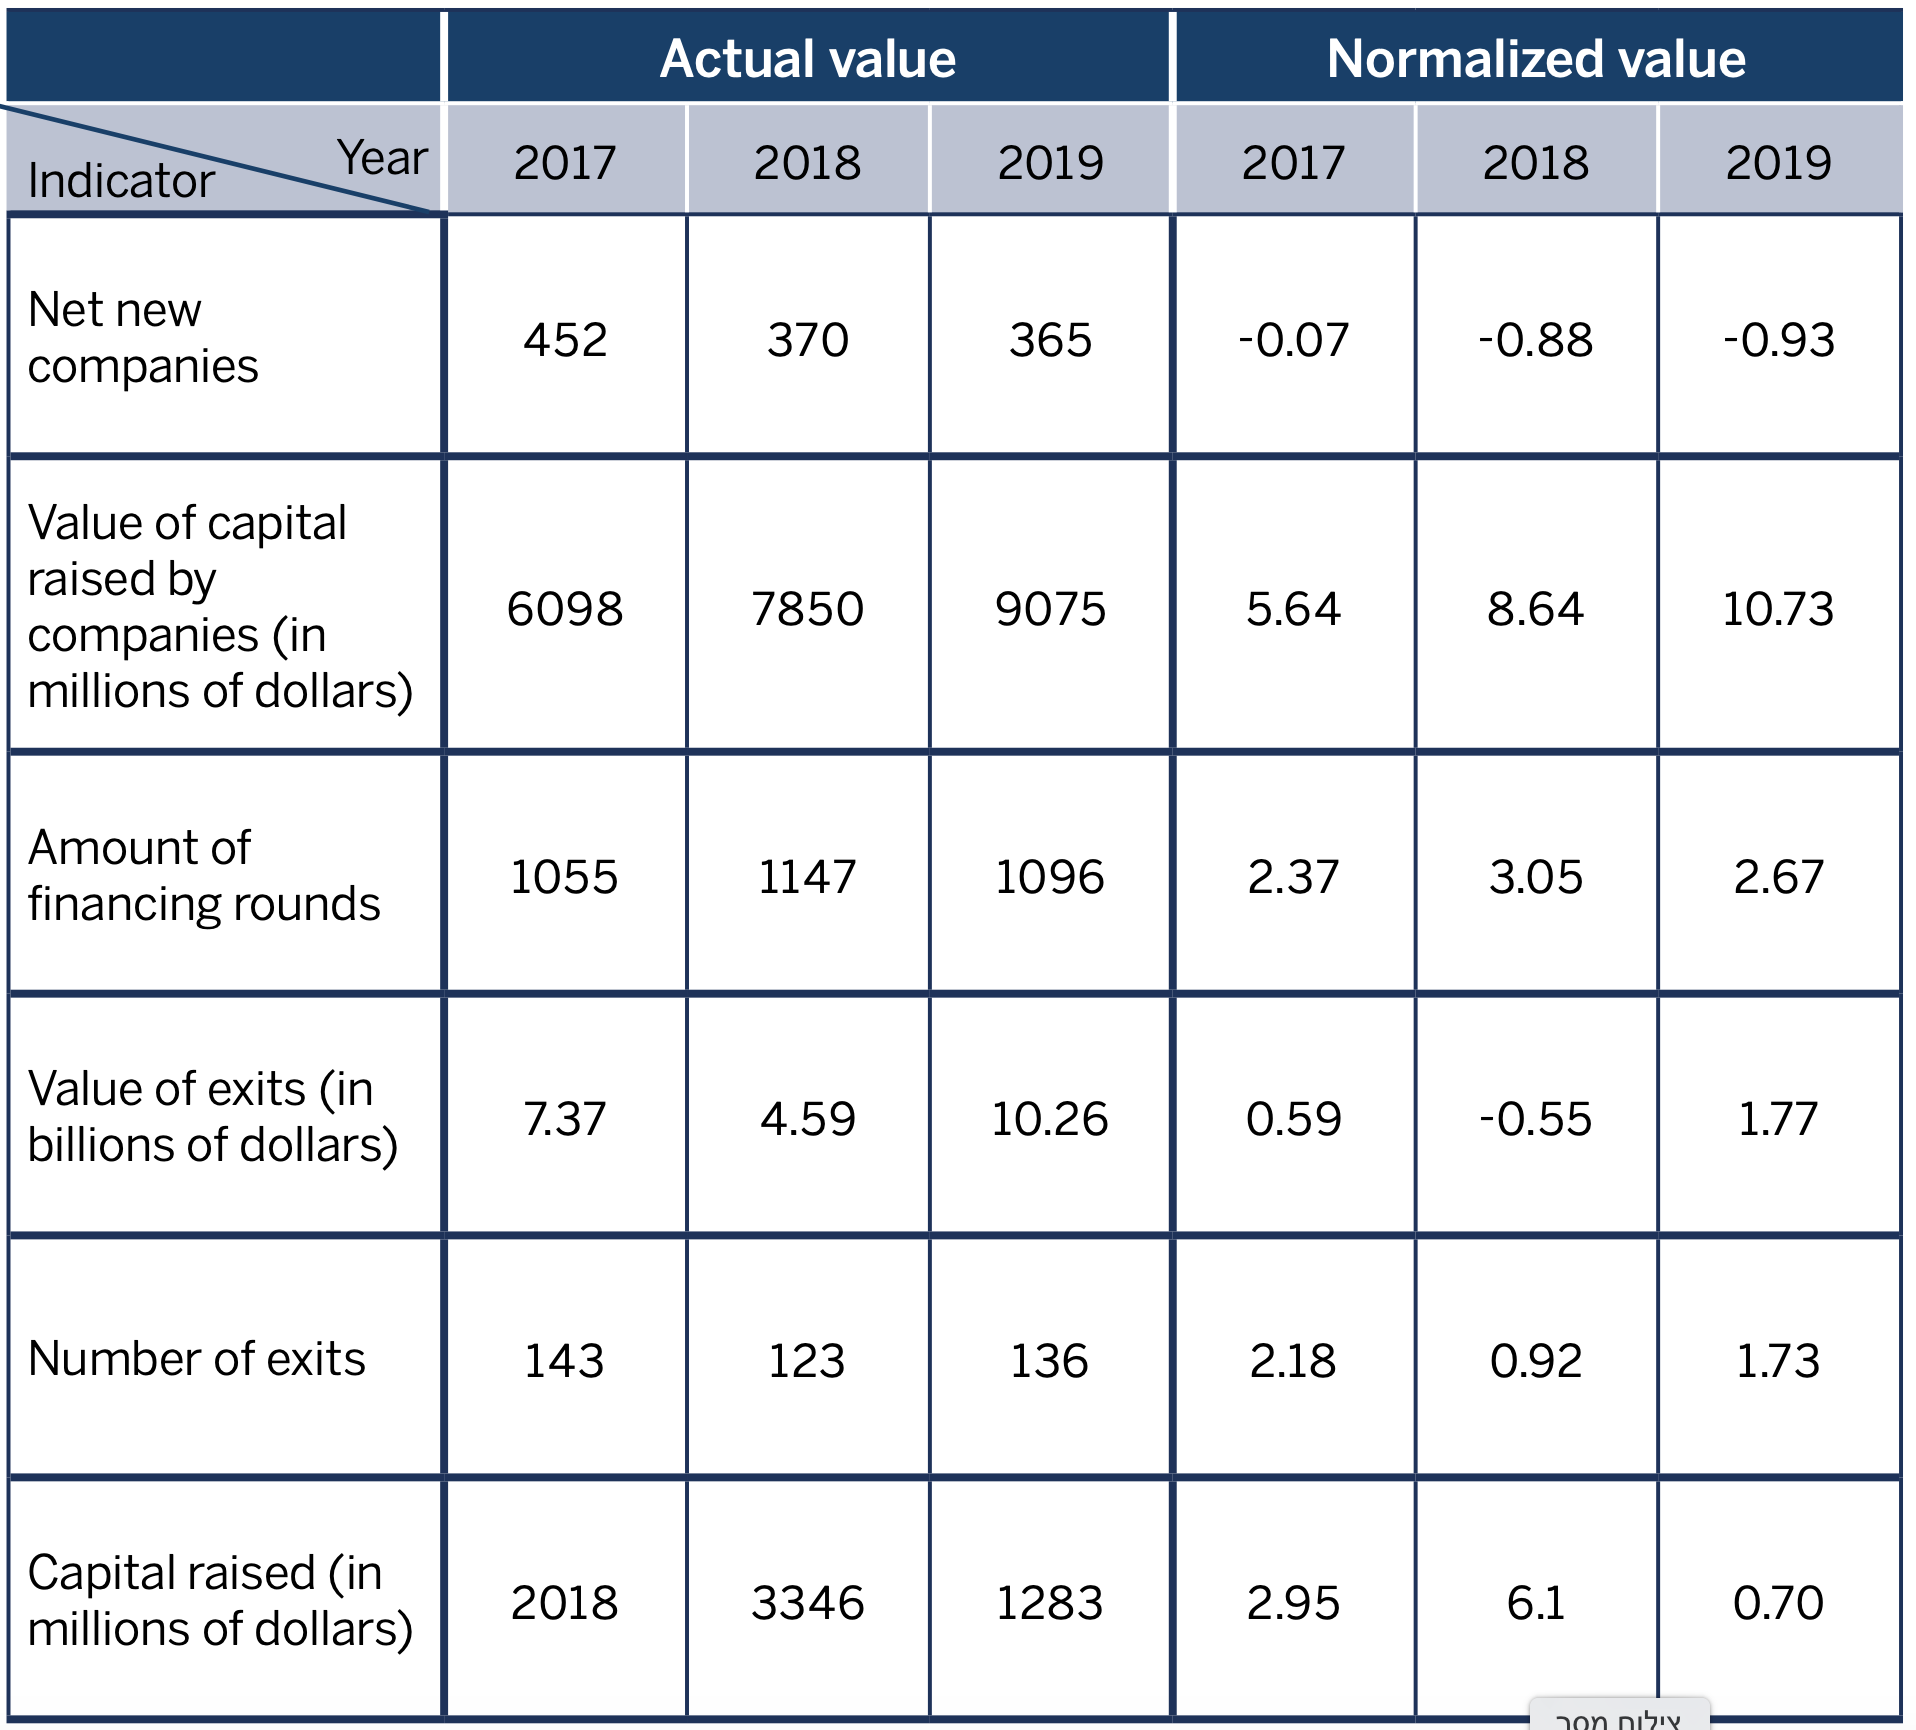 Actual value / Normalized value